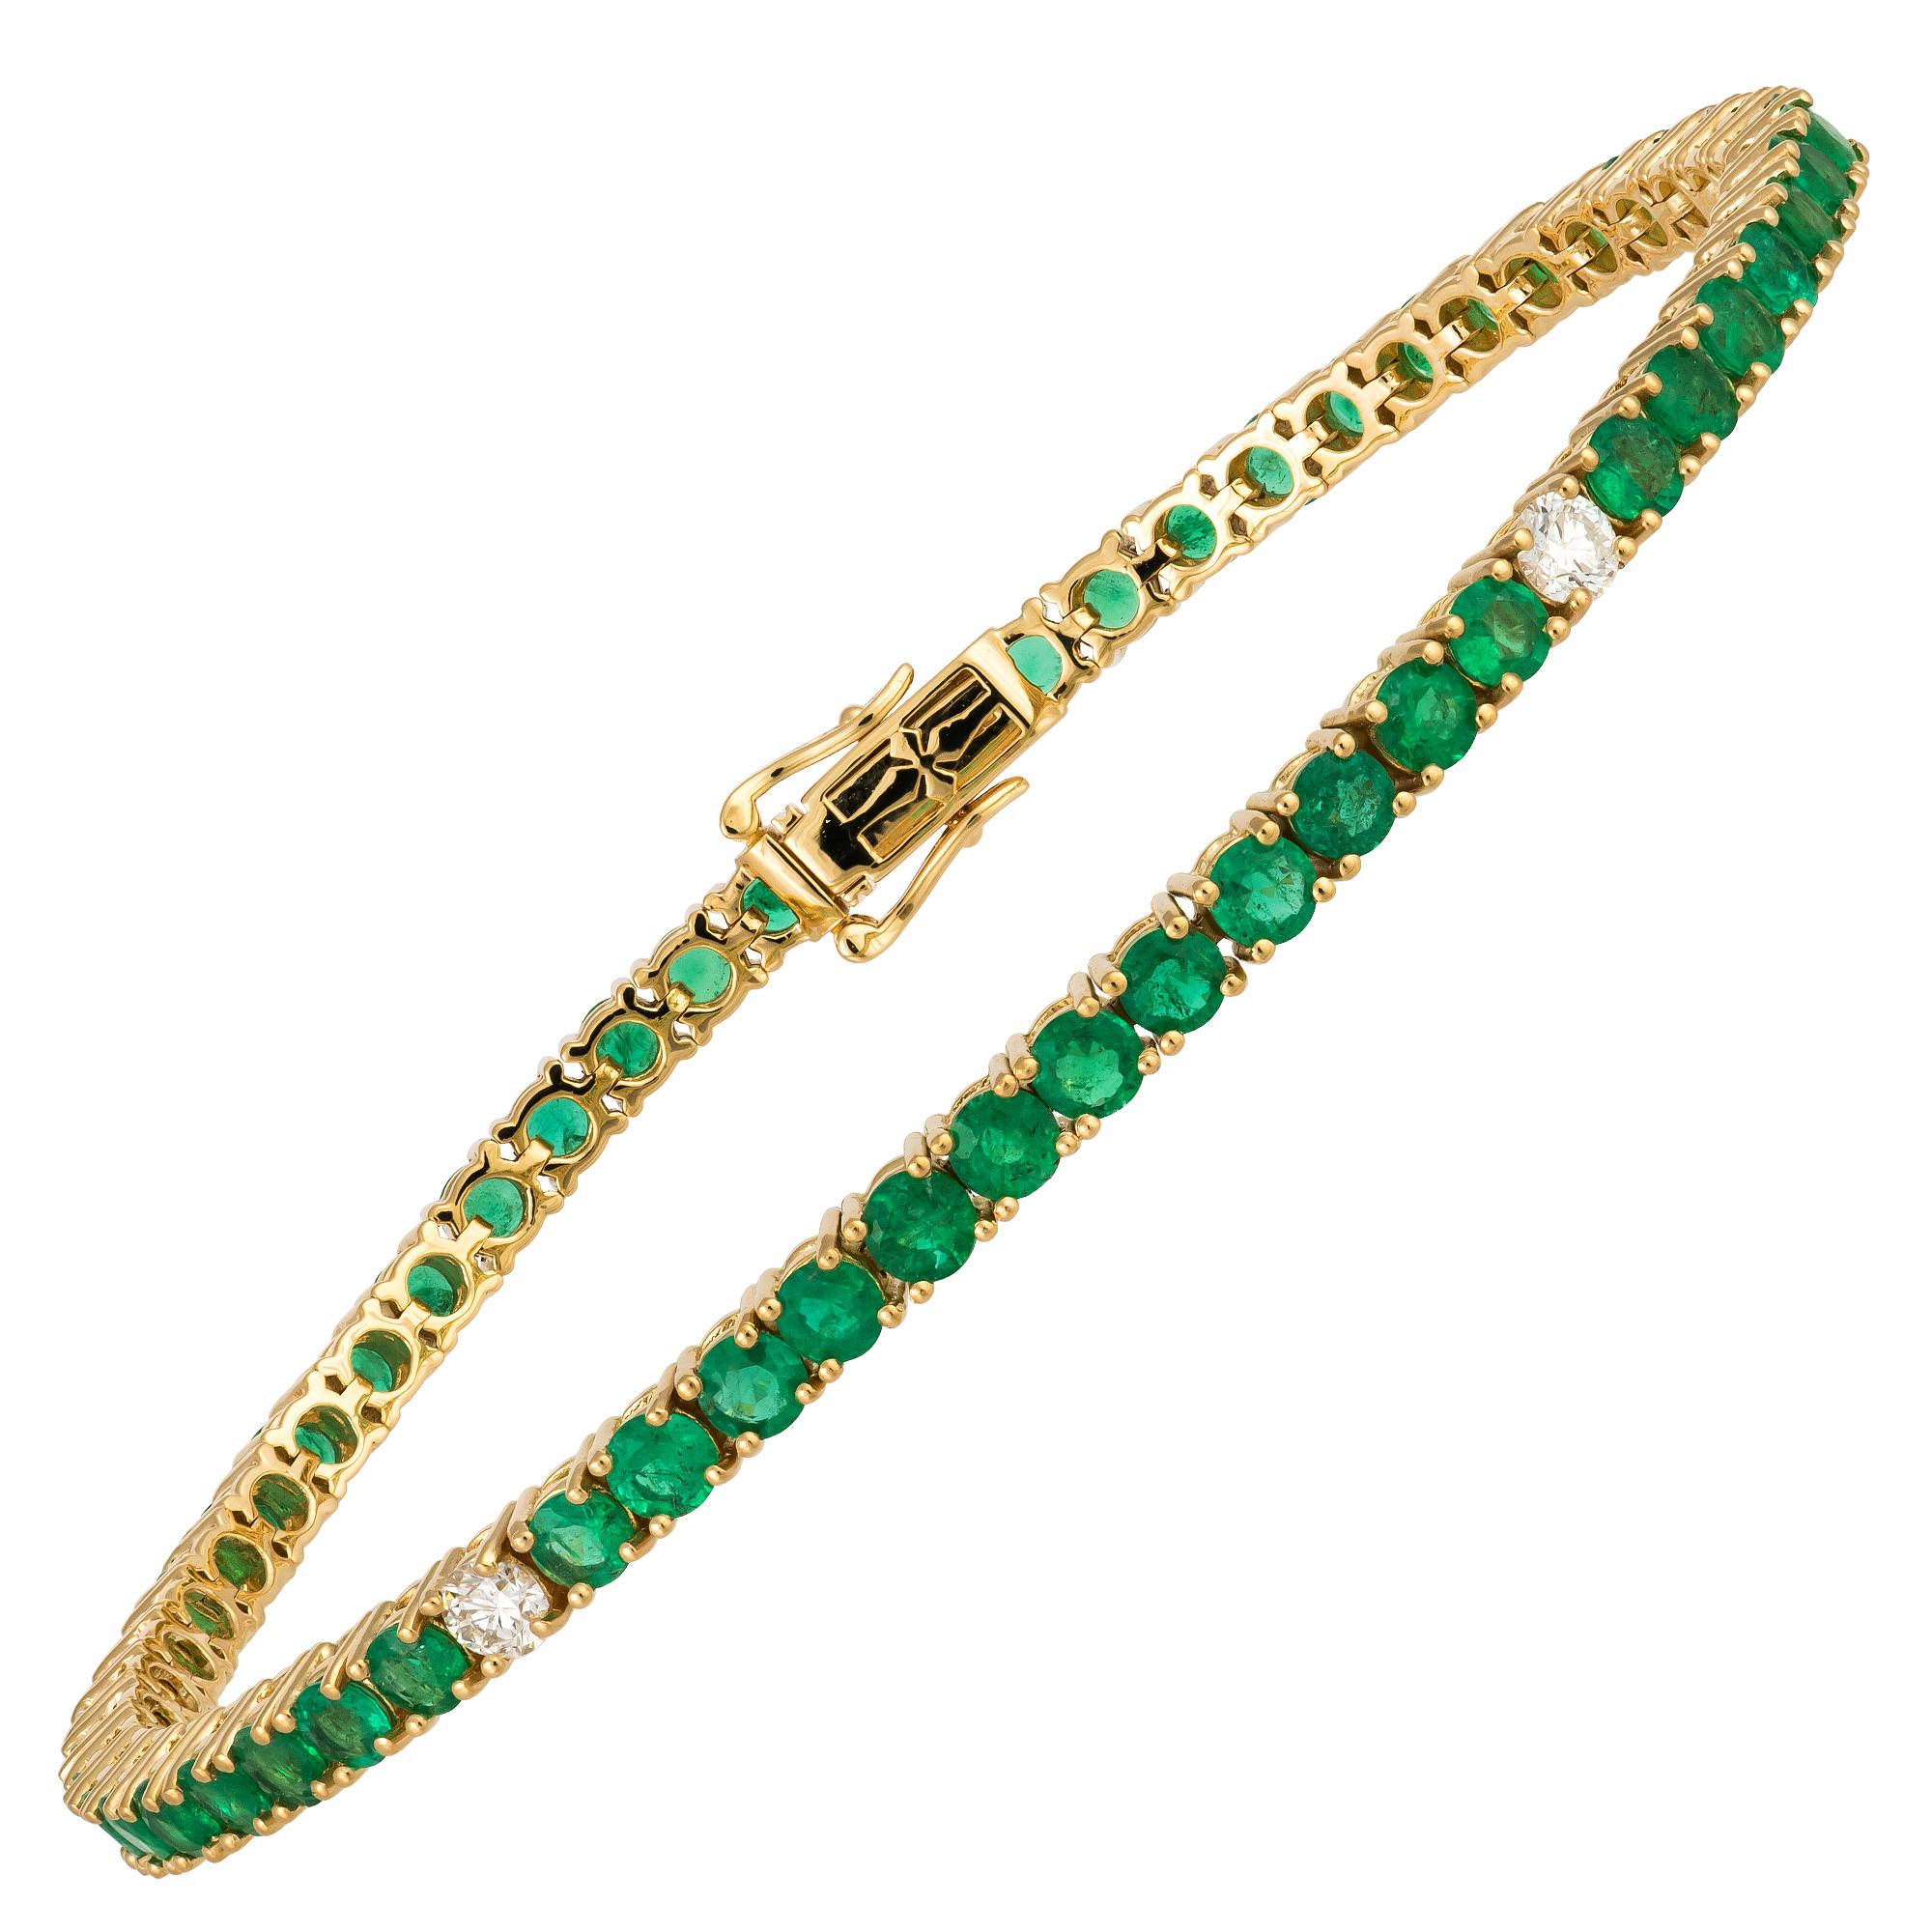 The Following Item we are offering is a Rare 18KT Gold Emerald and Diamond Tennis Bracelet. Bracelet is comprised of Finely Set Gorgeous Glittering Round Emeralds and Diamonds!!! T.C.W. Approx 6.75CTS!! The Emeralds and Diamonds are of Exquisite and